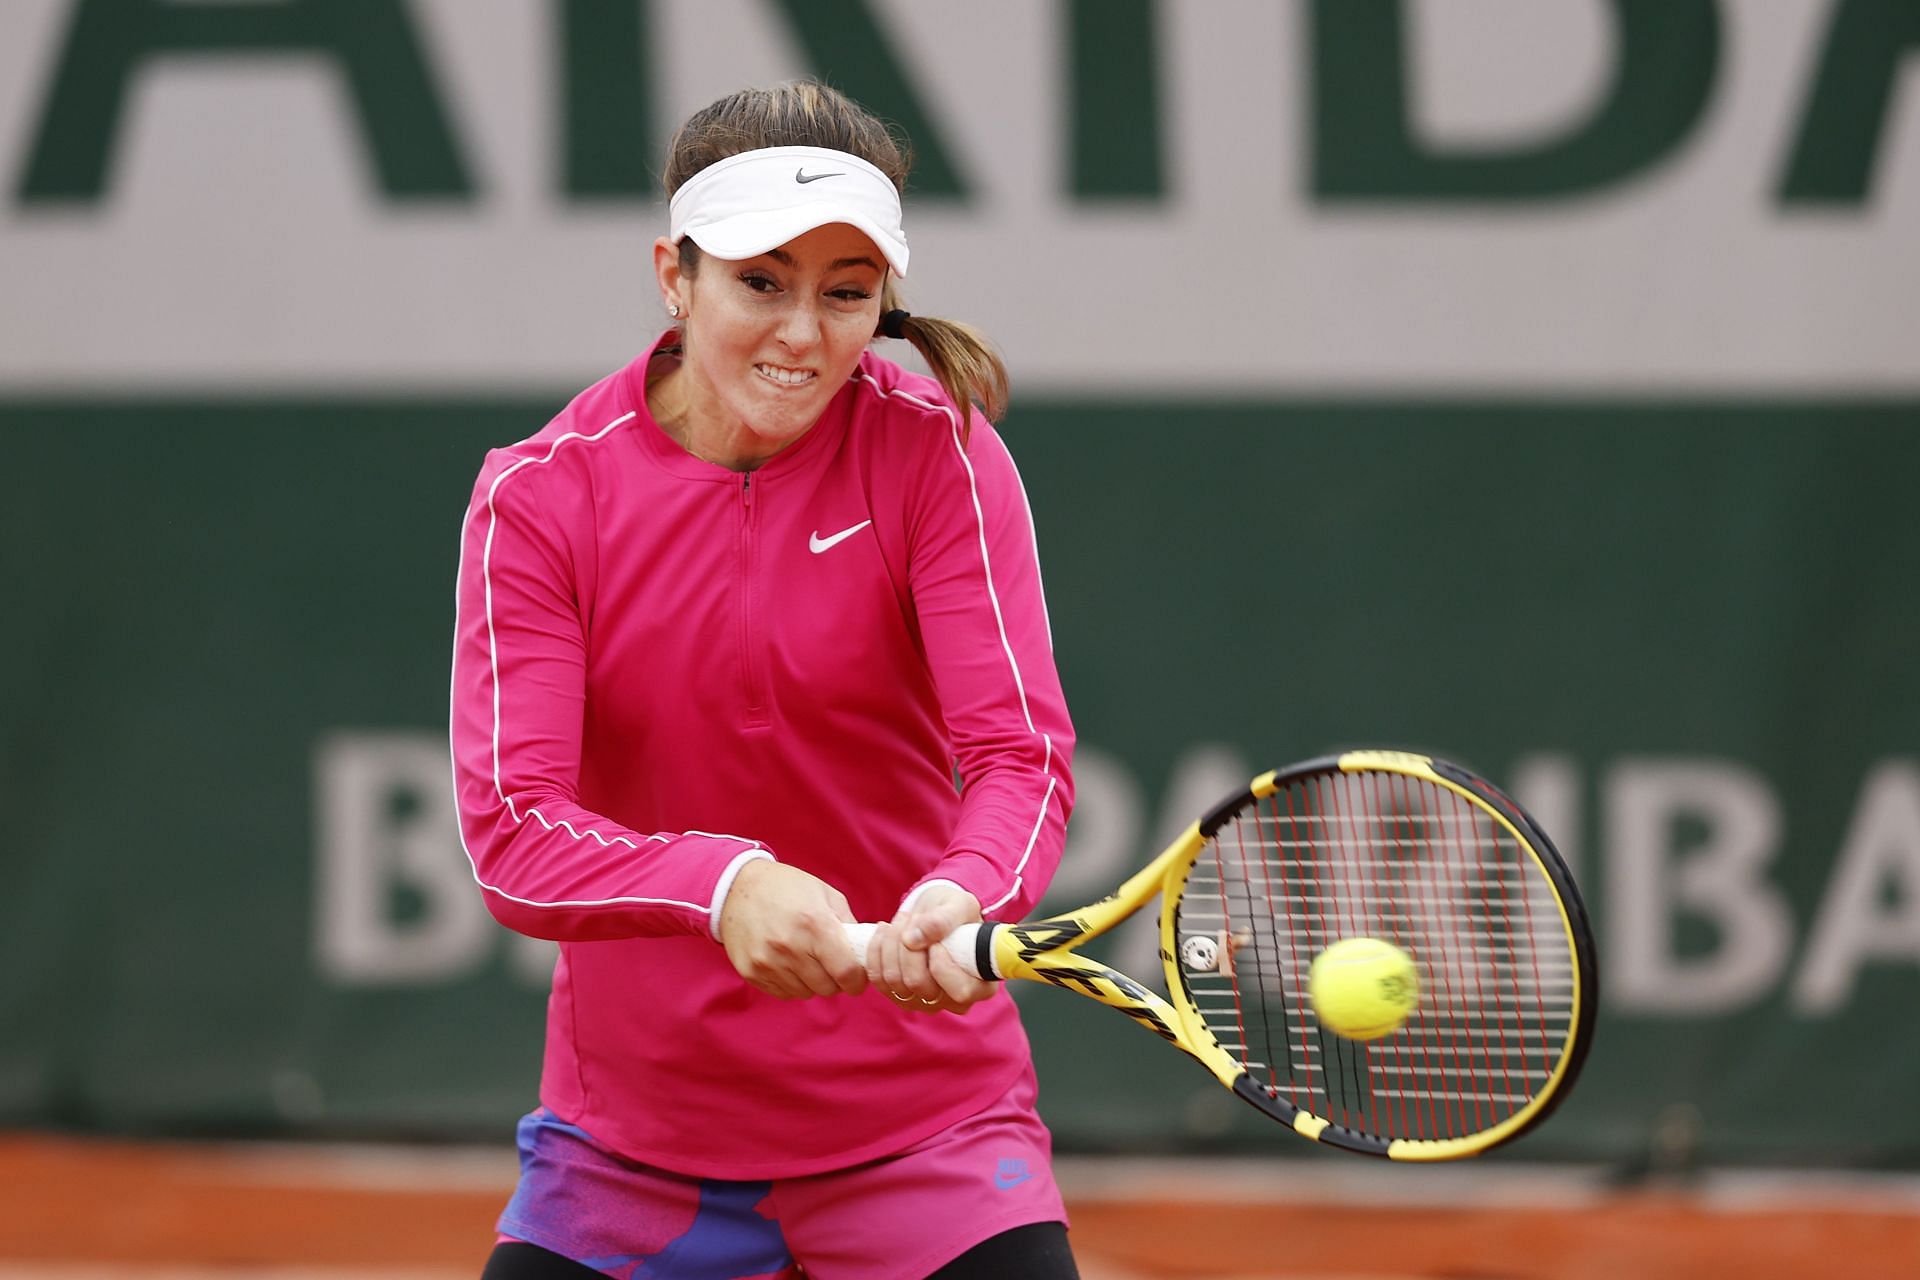 CiCi Bellis retired from tennis this January after persistent battles with injuries.